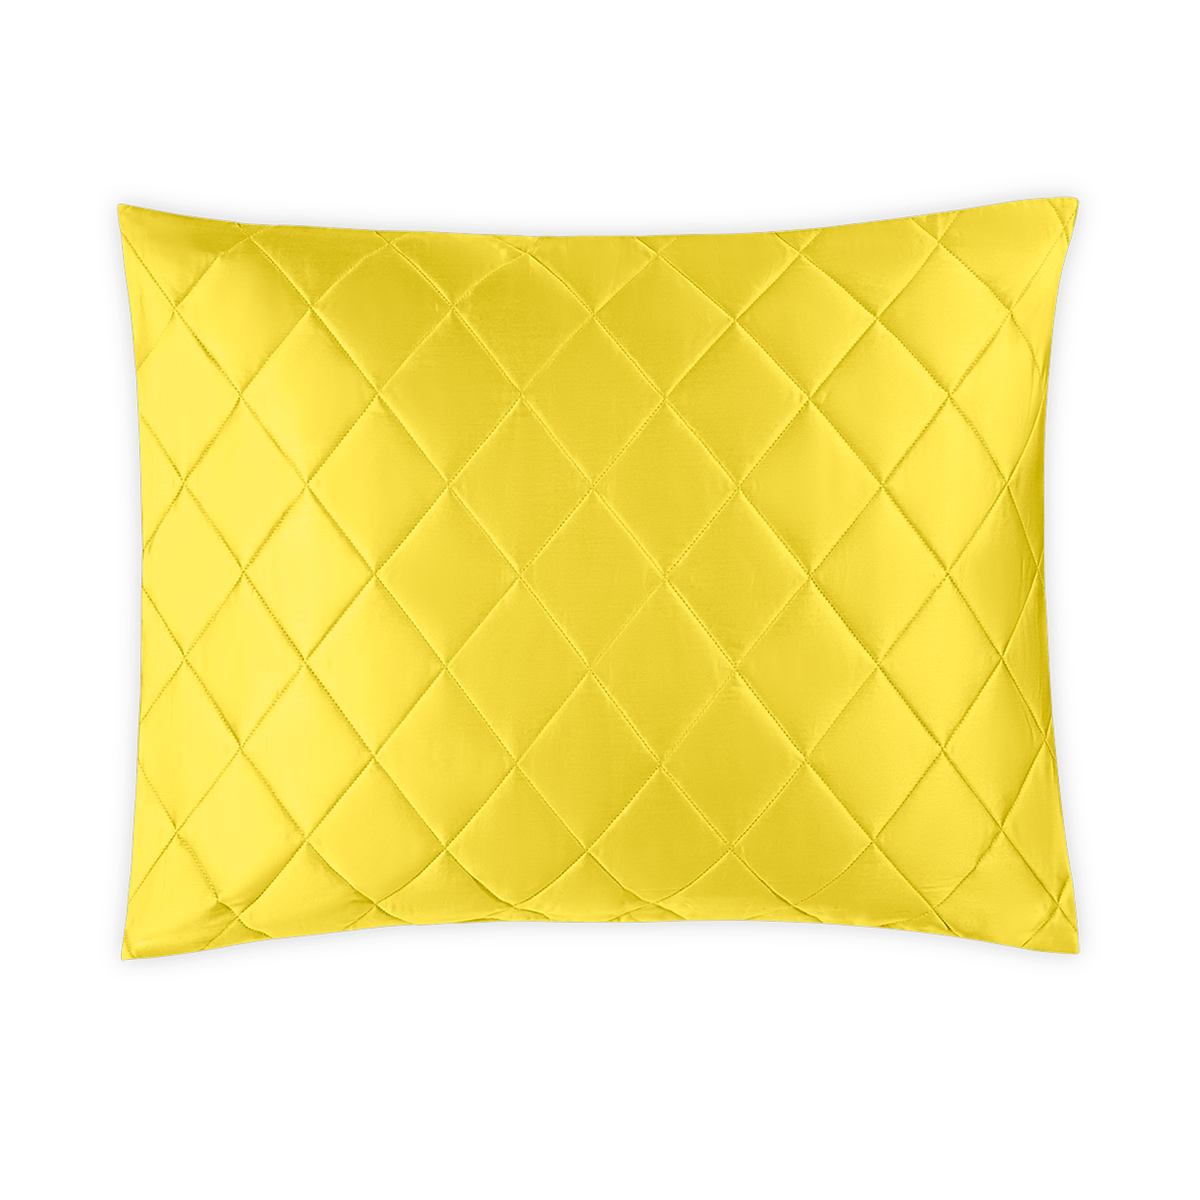 Silo Image of Matouk Nocturne Quilted Bedding Sham in Lemon